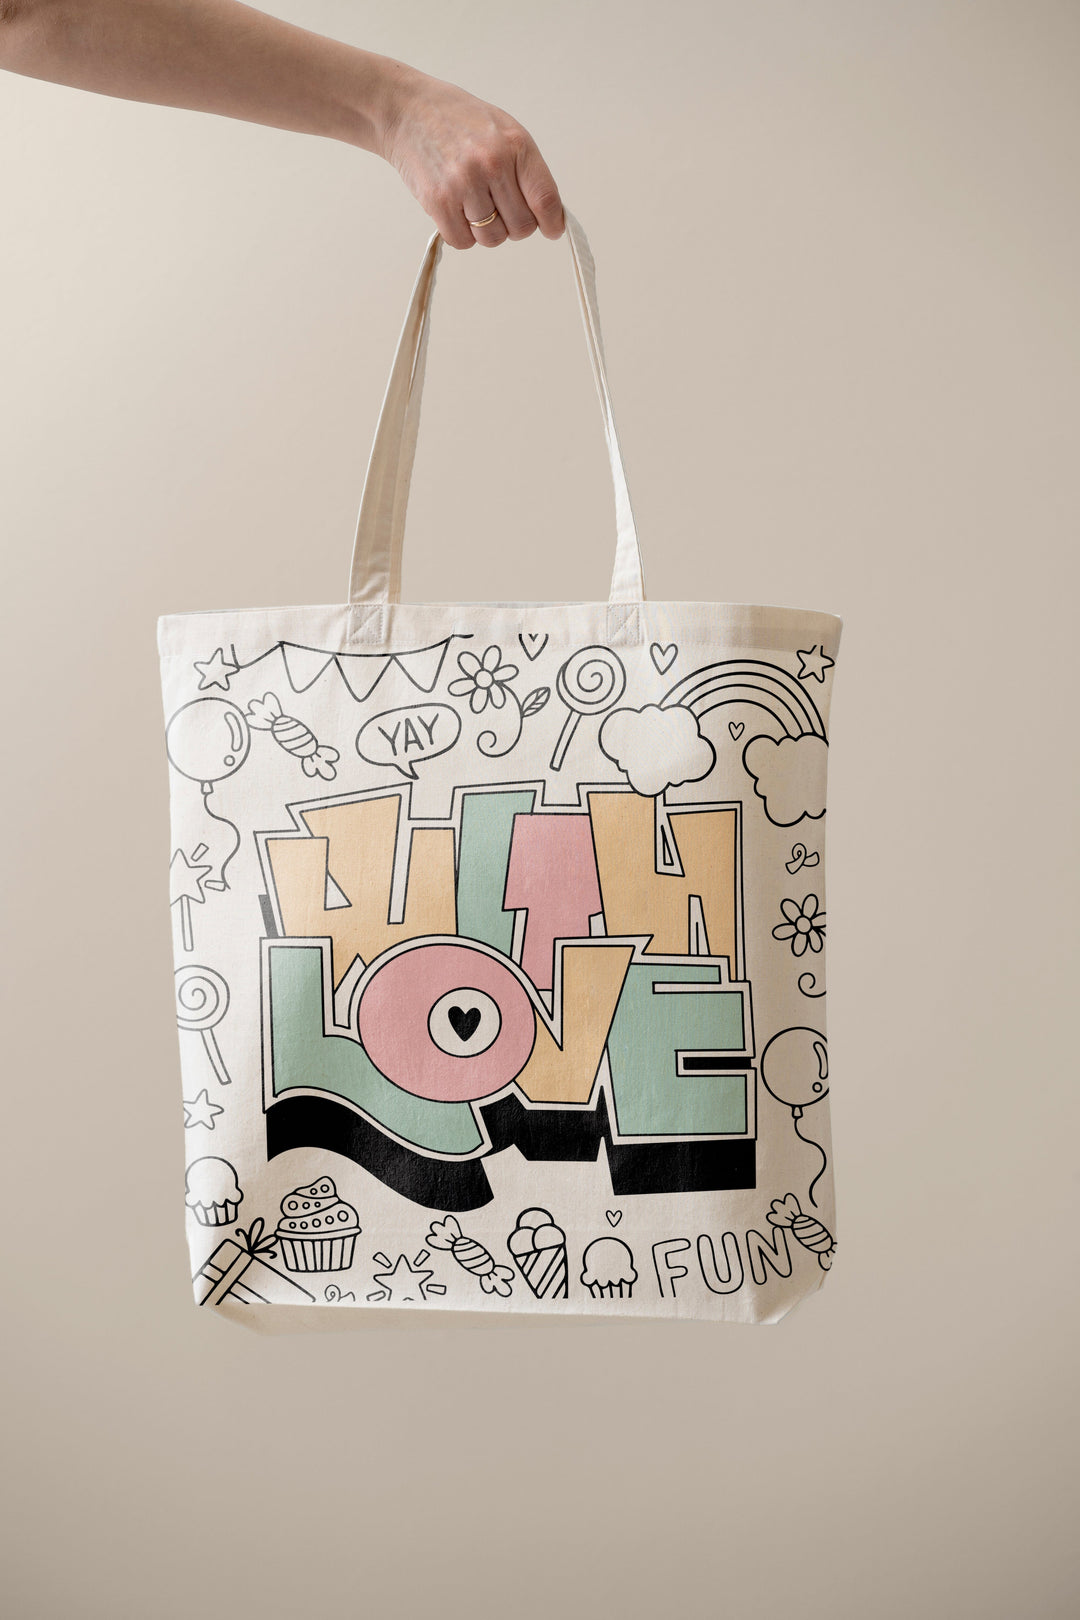 With Love - Tote Bag Lunch Boxes & Totes CandyFlossstores 